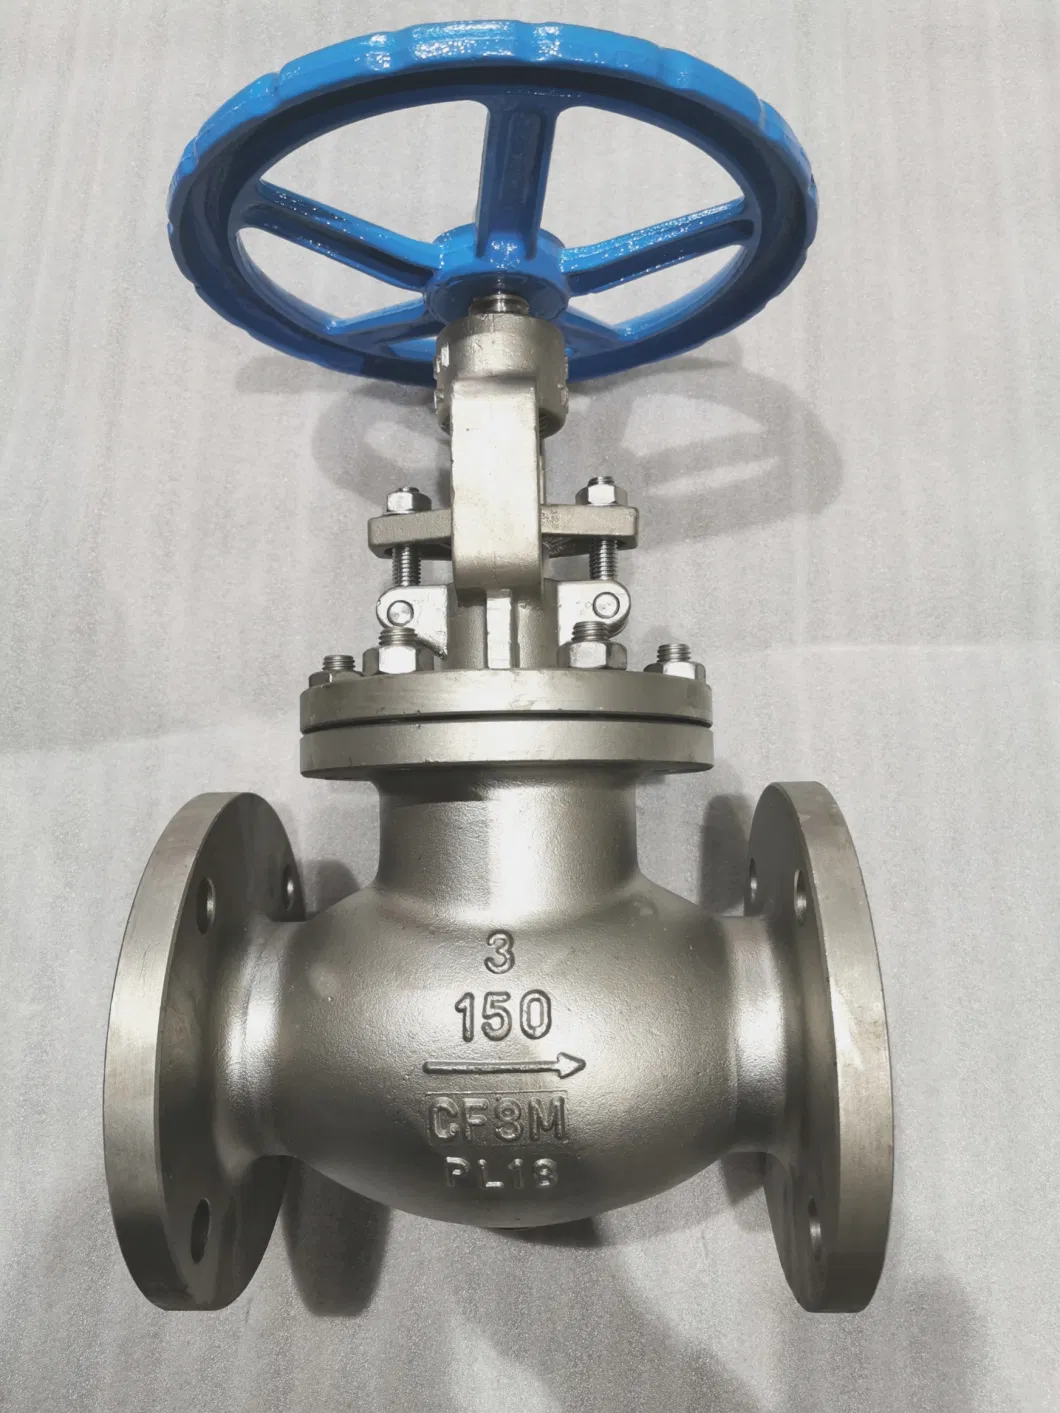 Stainless Steel/Wcb/F304/F316/F321 Flange & Thread & Butt Weld & Socket Weld Forged Steel Check Globe Gate Valve